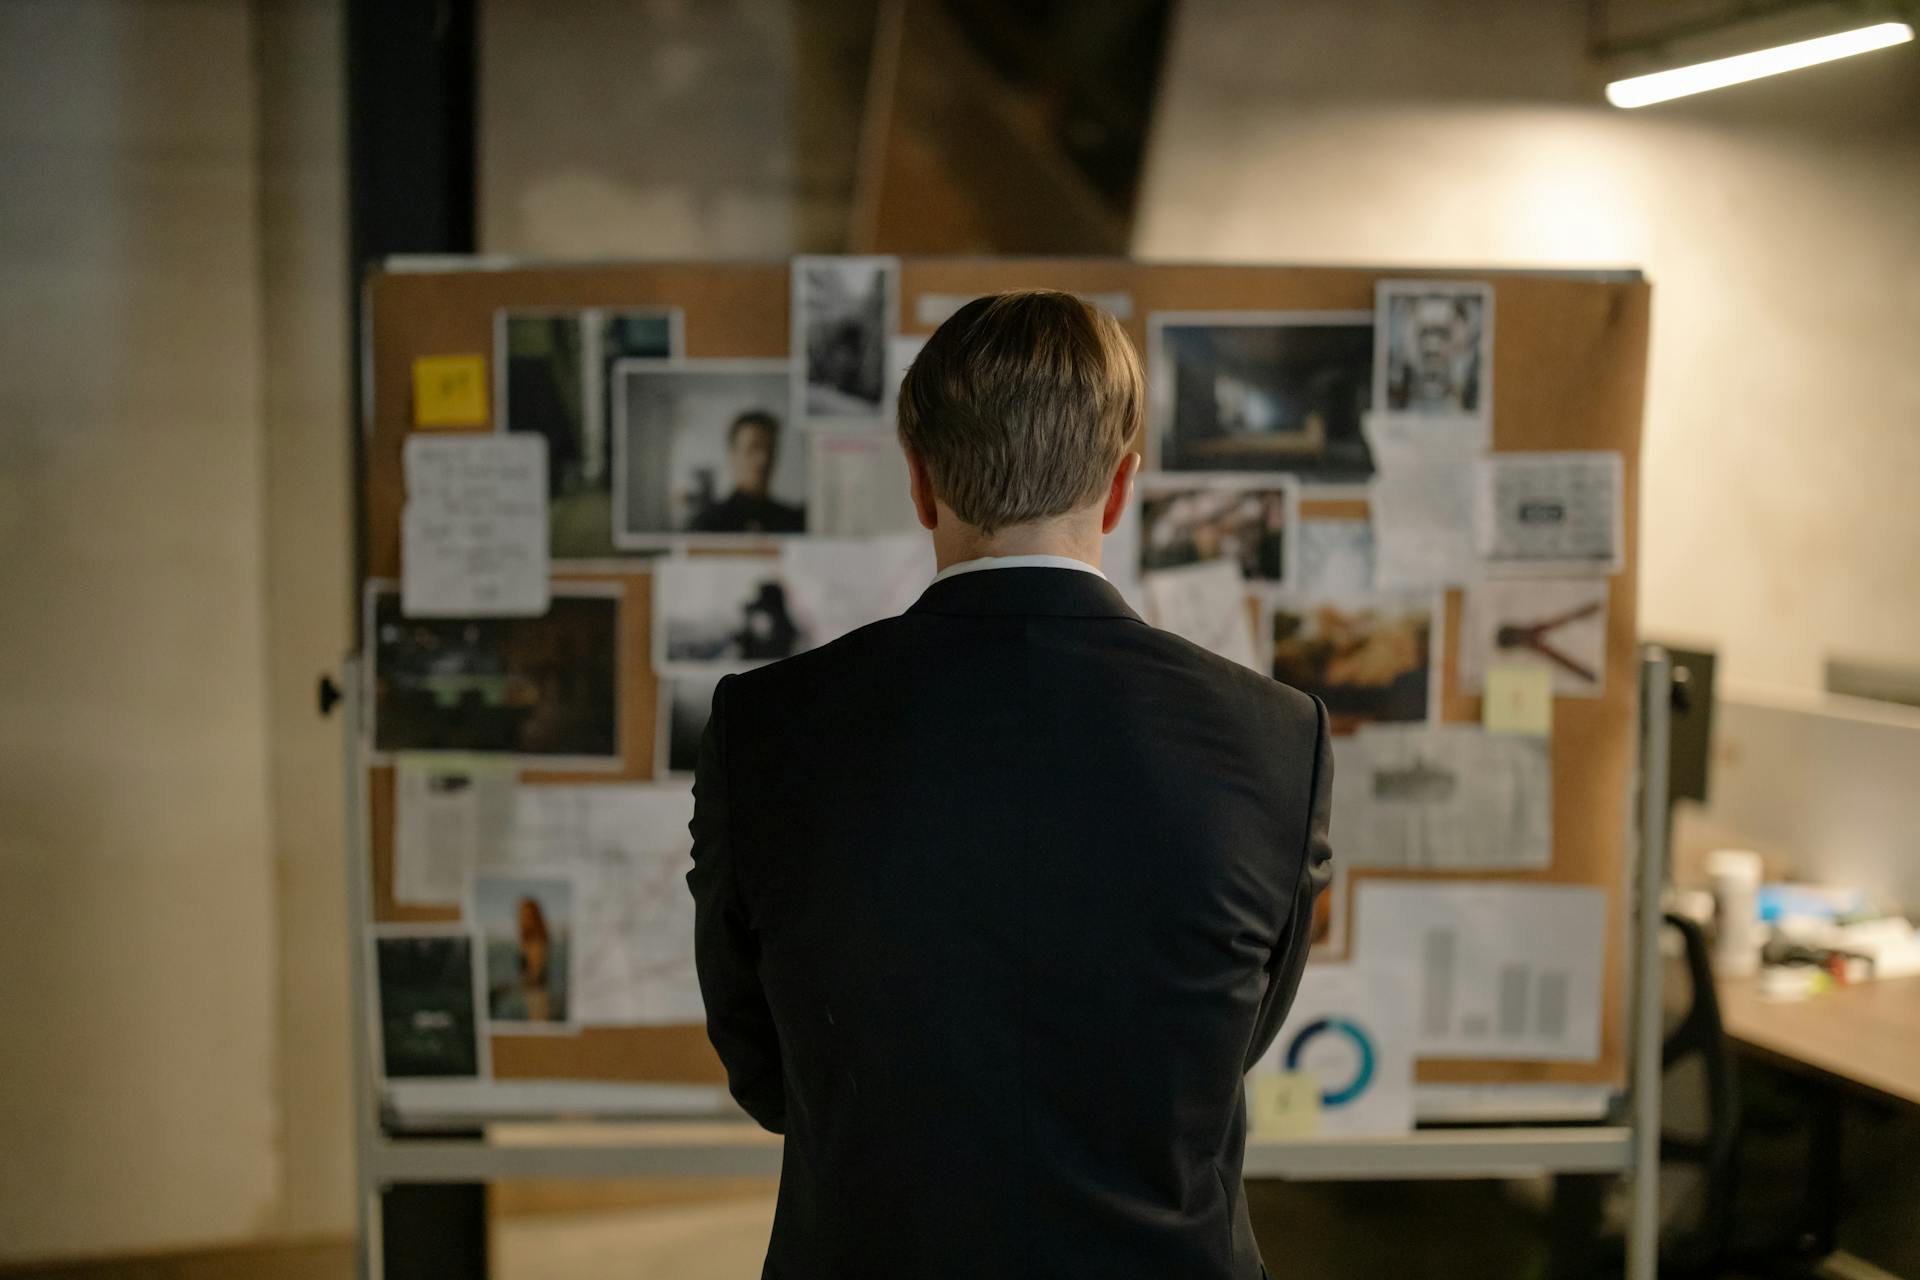 A detective looking at a board | Source: Pexels